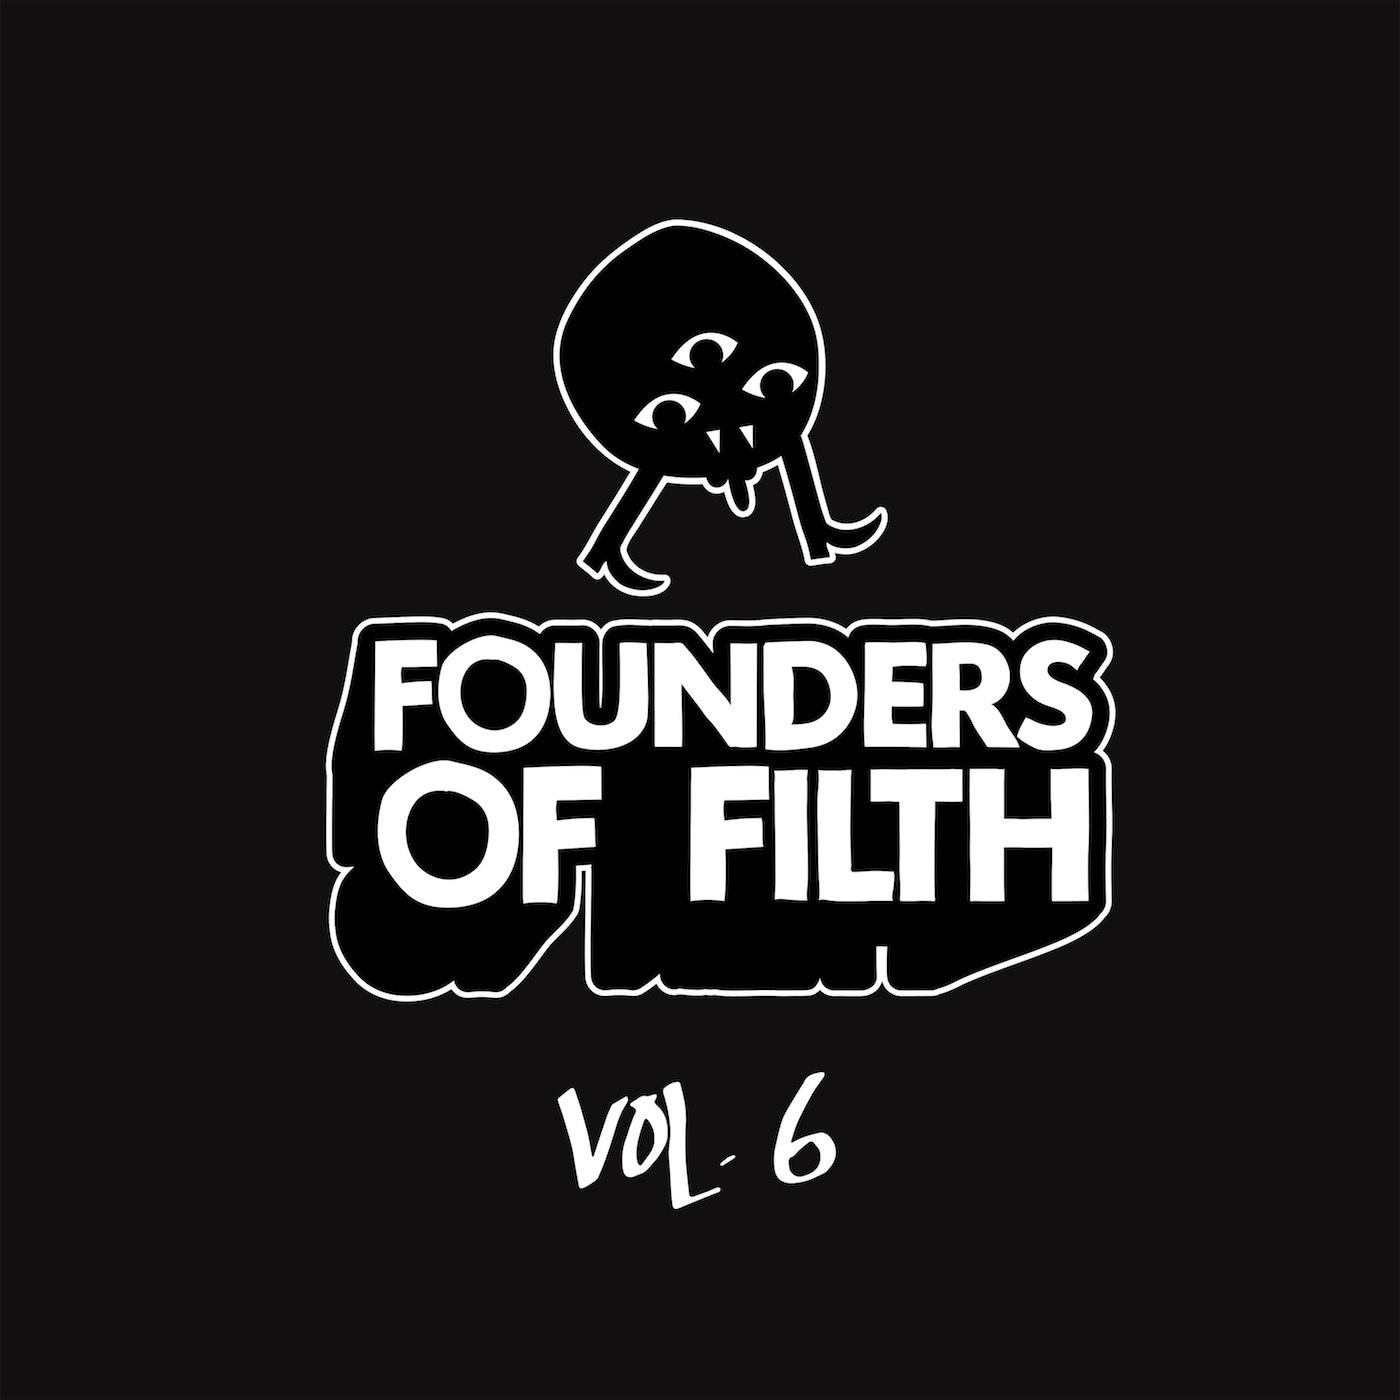 Founders of Filth Volume Six